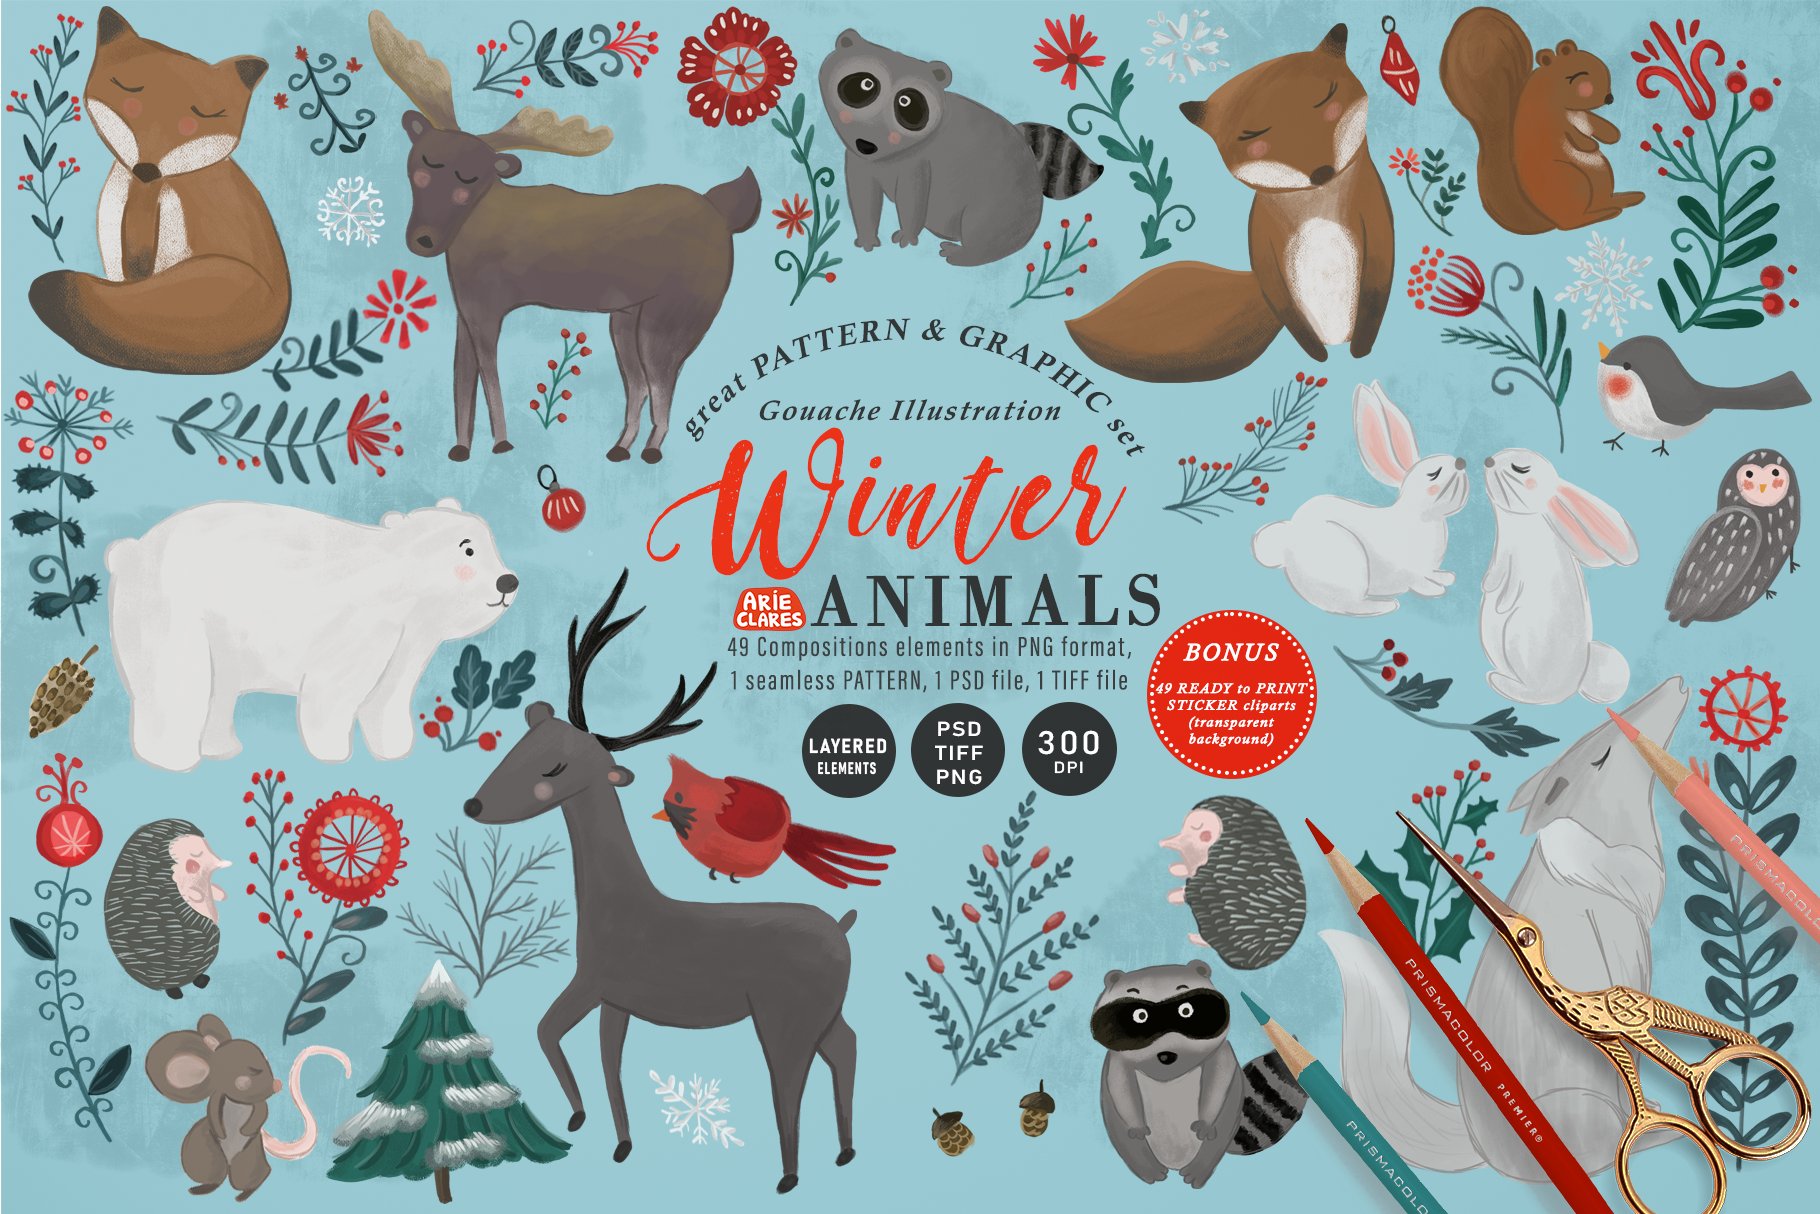 Winter Animals cover image.